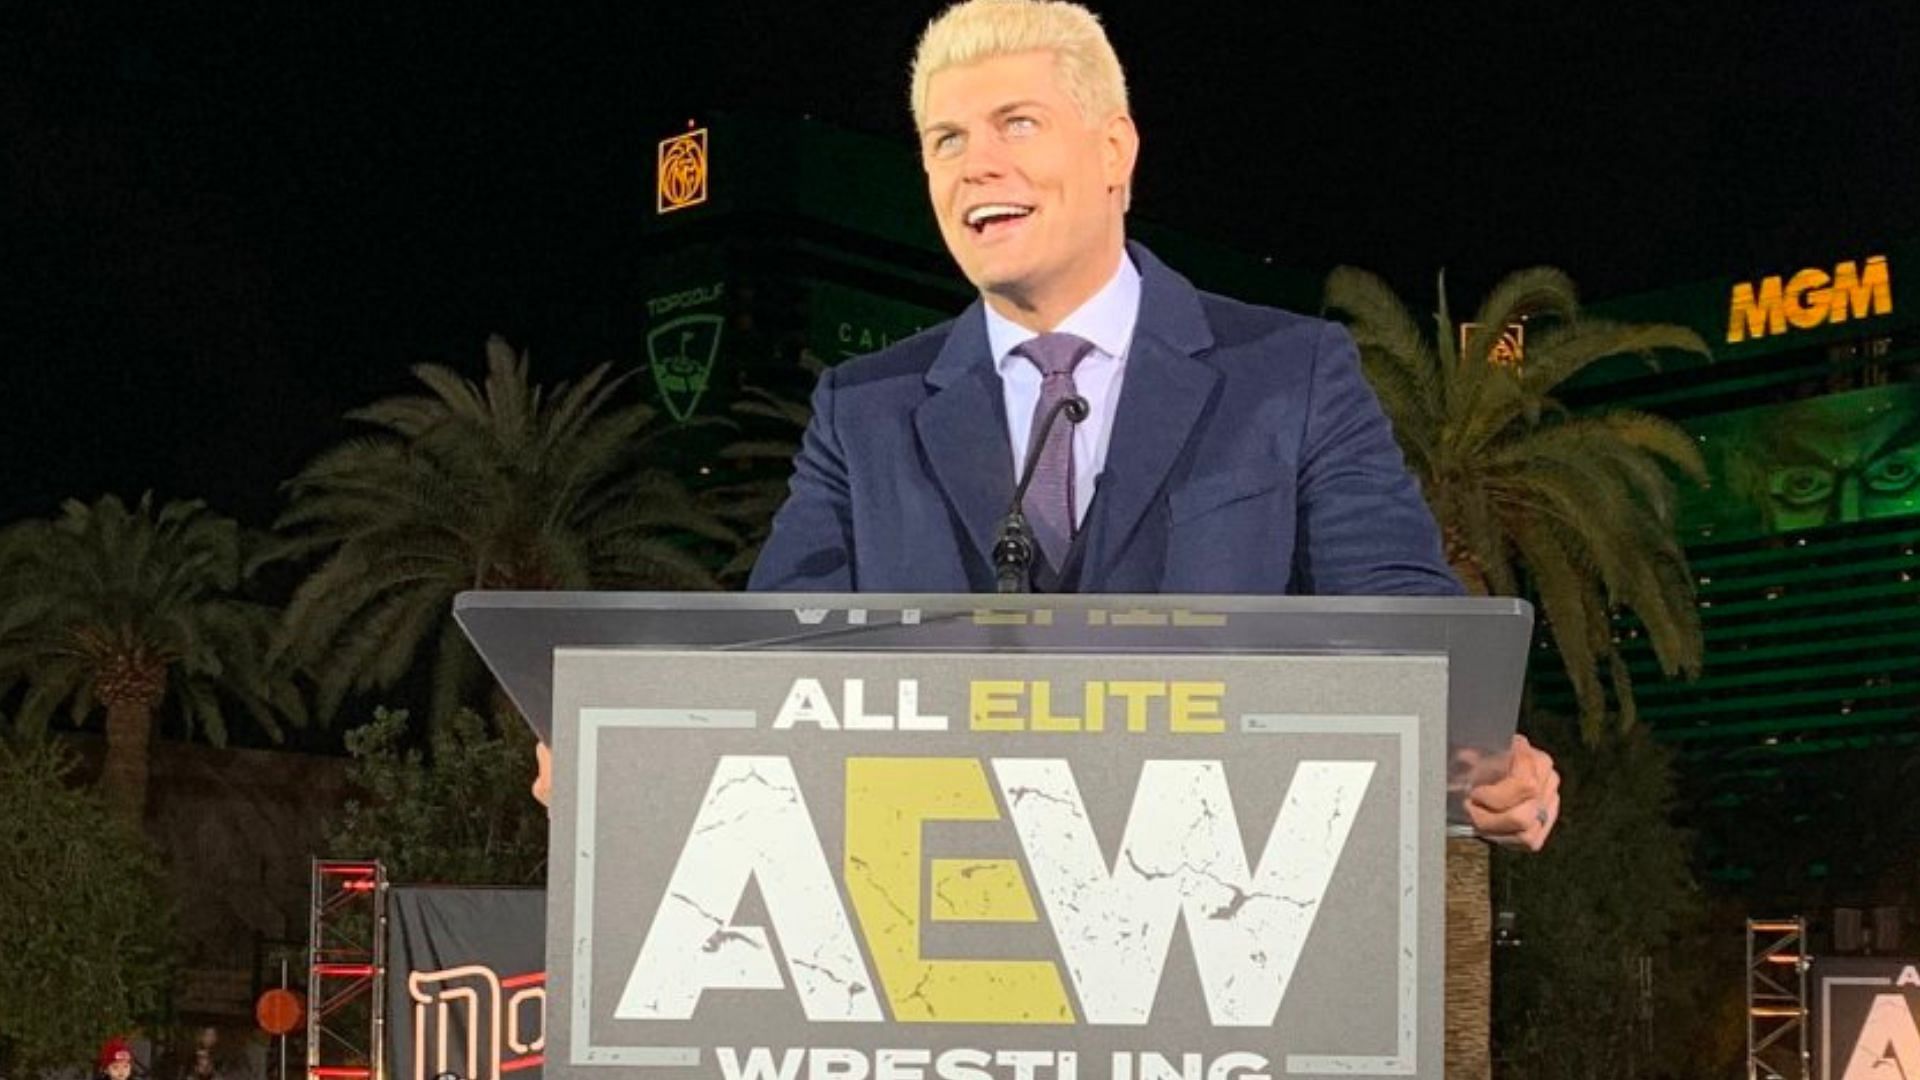 Cody Rhodes at an AEW press conference in 2019